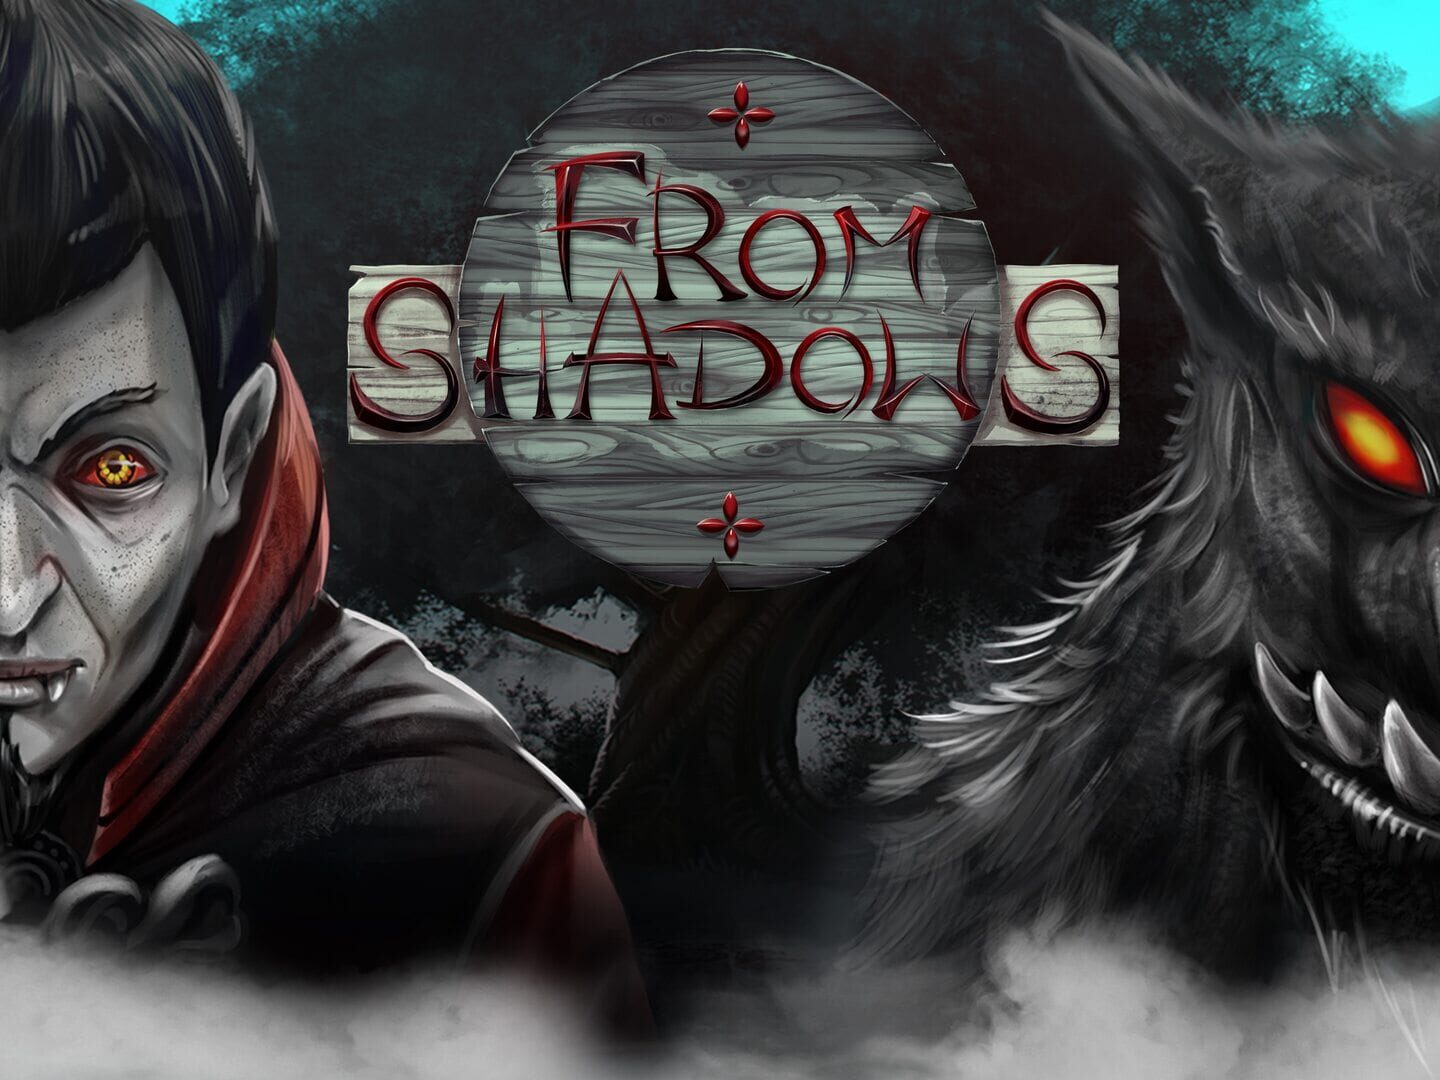 From Shadows artwork